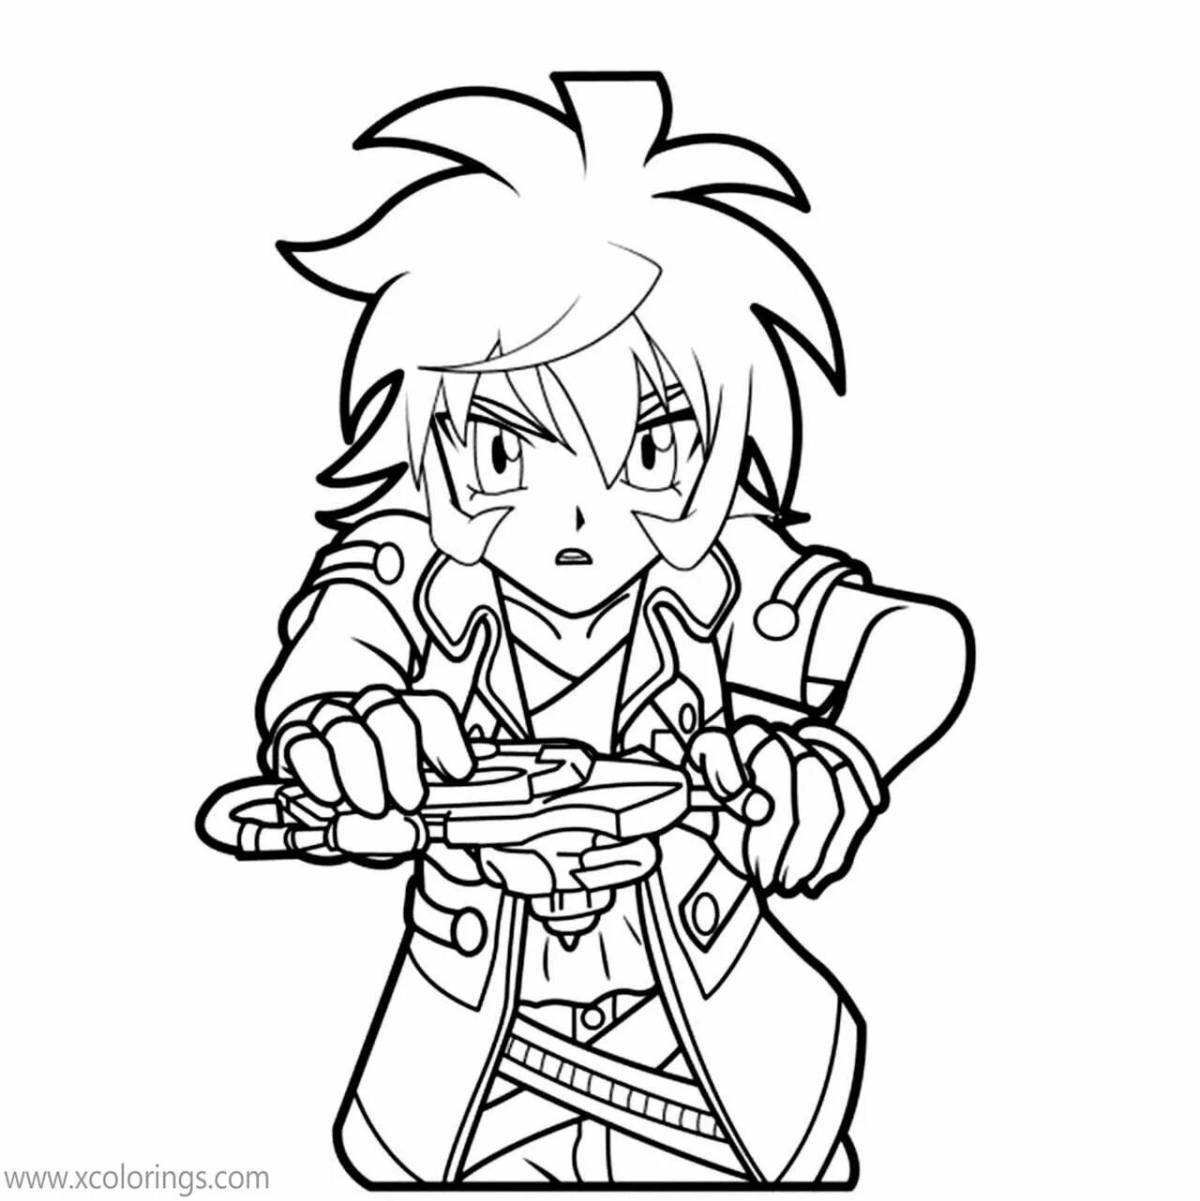 Beyblade burst live coloring page